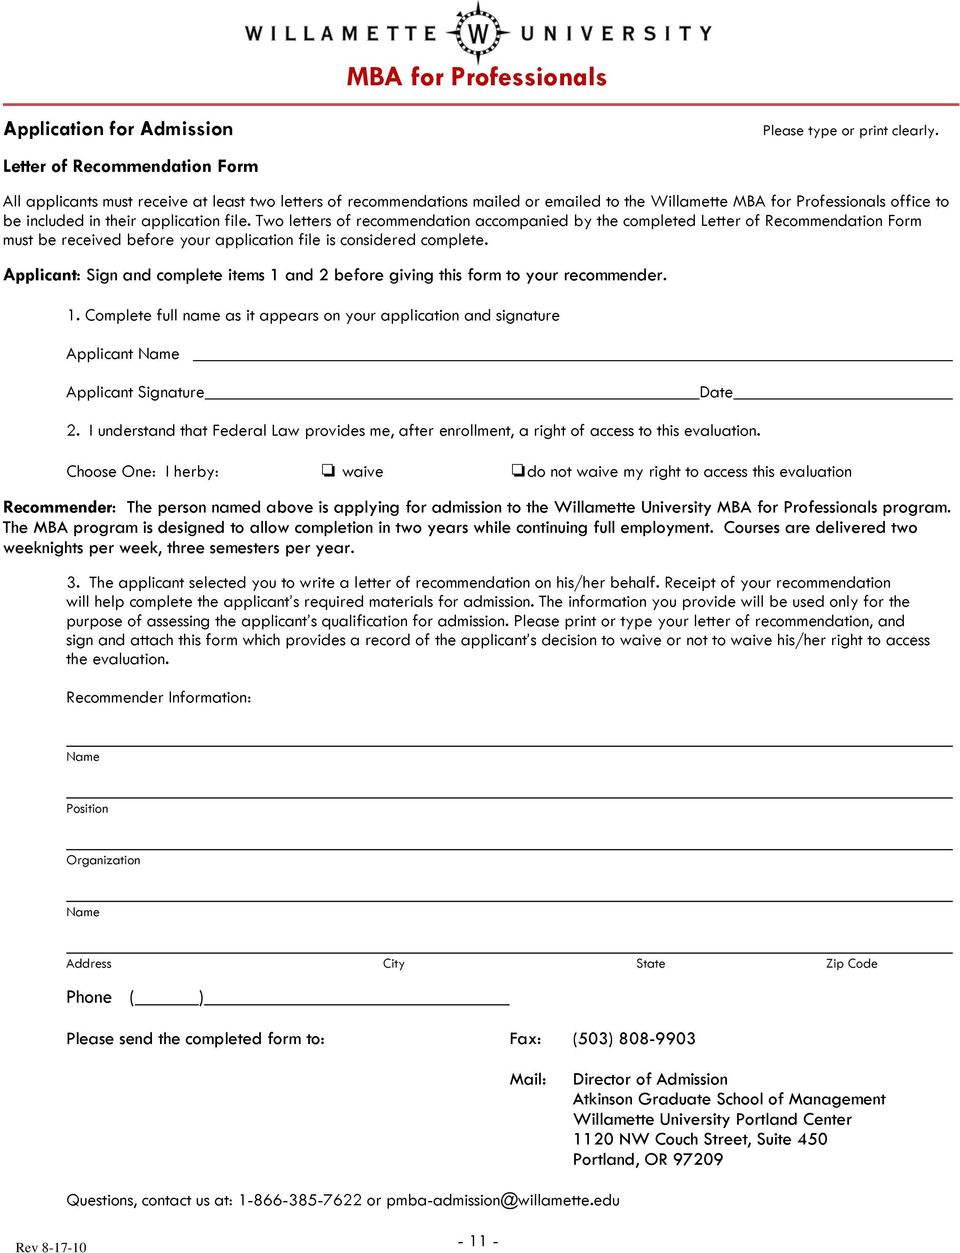 Applicant: Sign and complete items 1 and 2 before giving this form to your recommender. 1. Complete full name as it appears on your application and signature Applicant Name Applicant Signature Date 2.